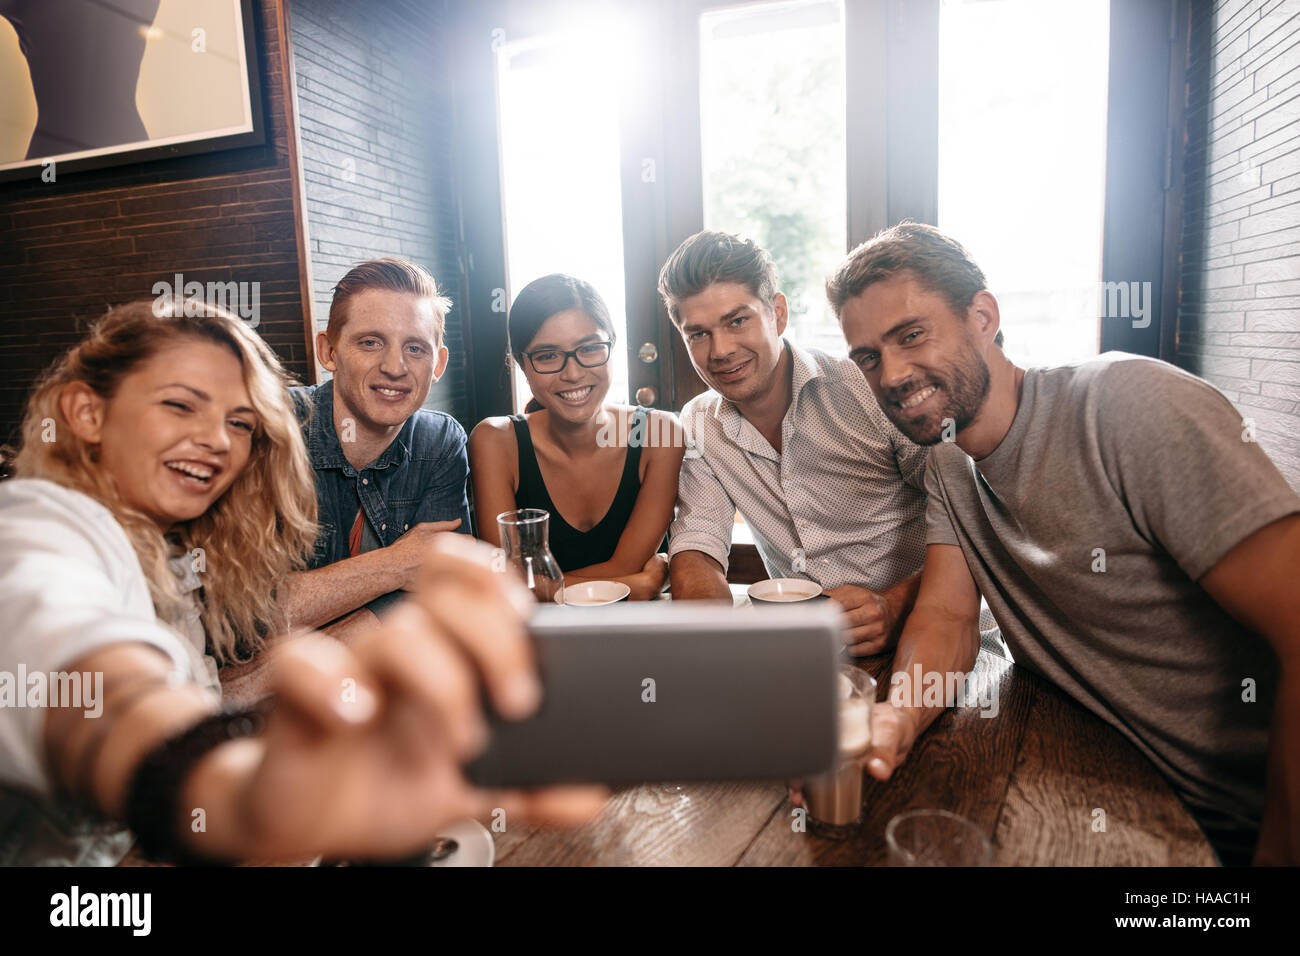 Small group of friends taking selfie on a mobile phone. Young men and women sitting together at cafe and taking a self portrait on smart phone. Stock Photo